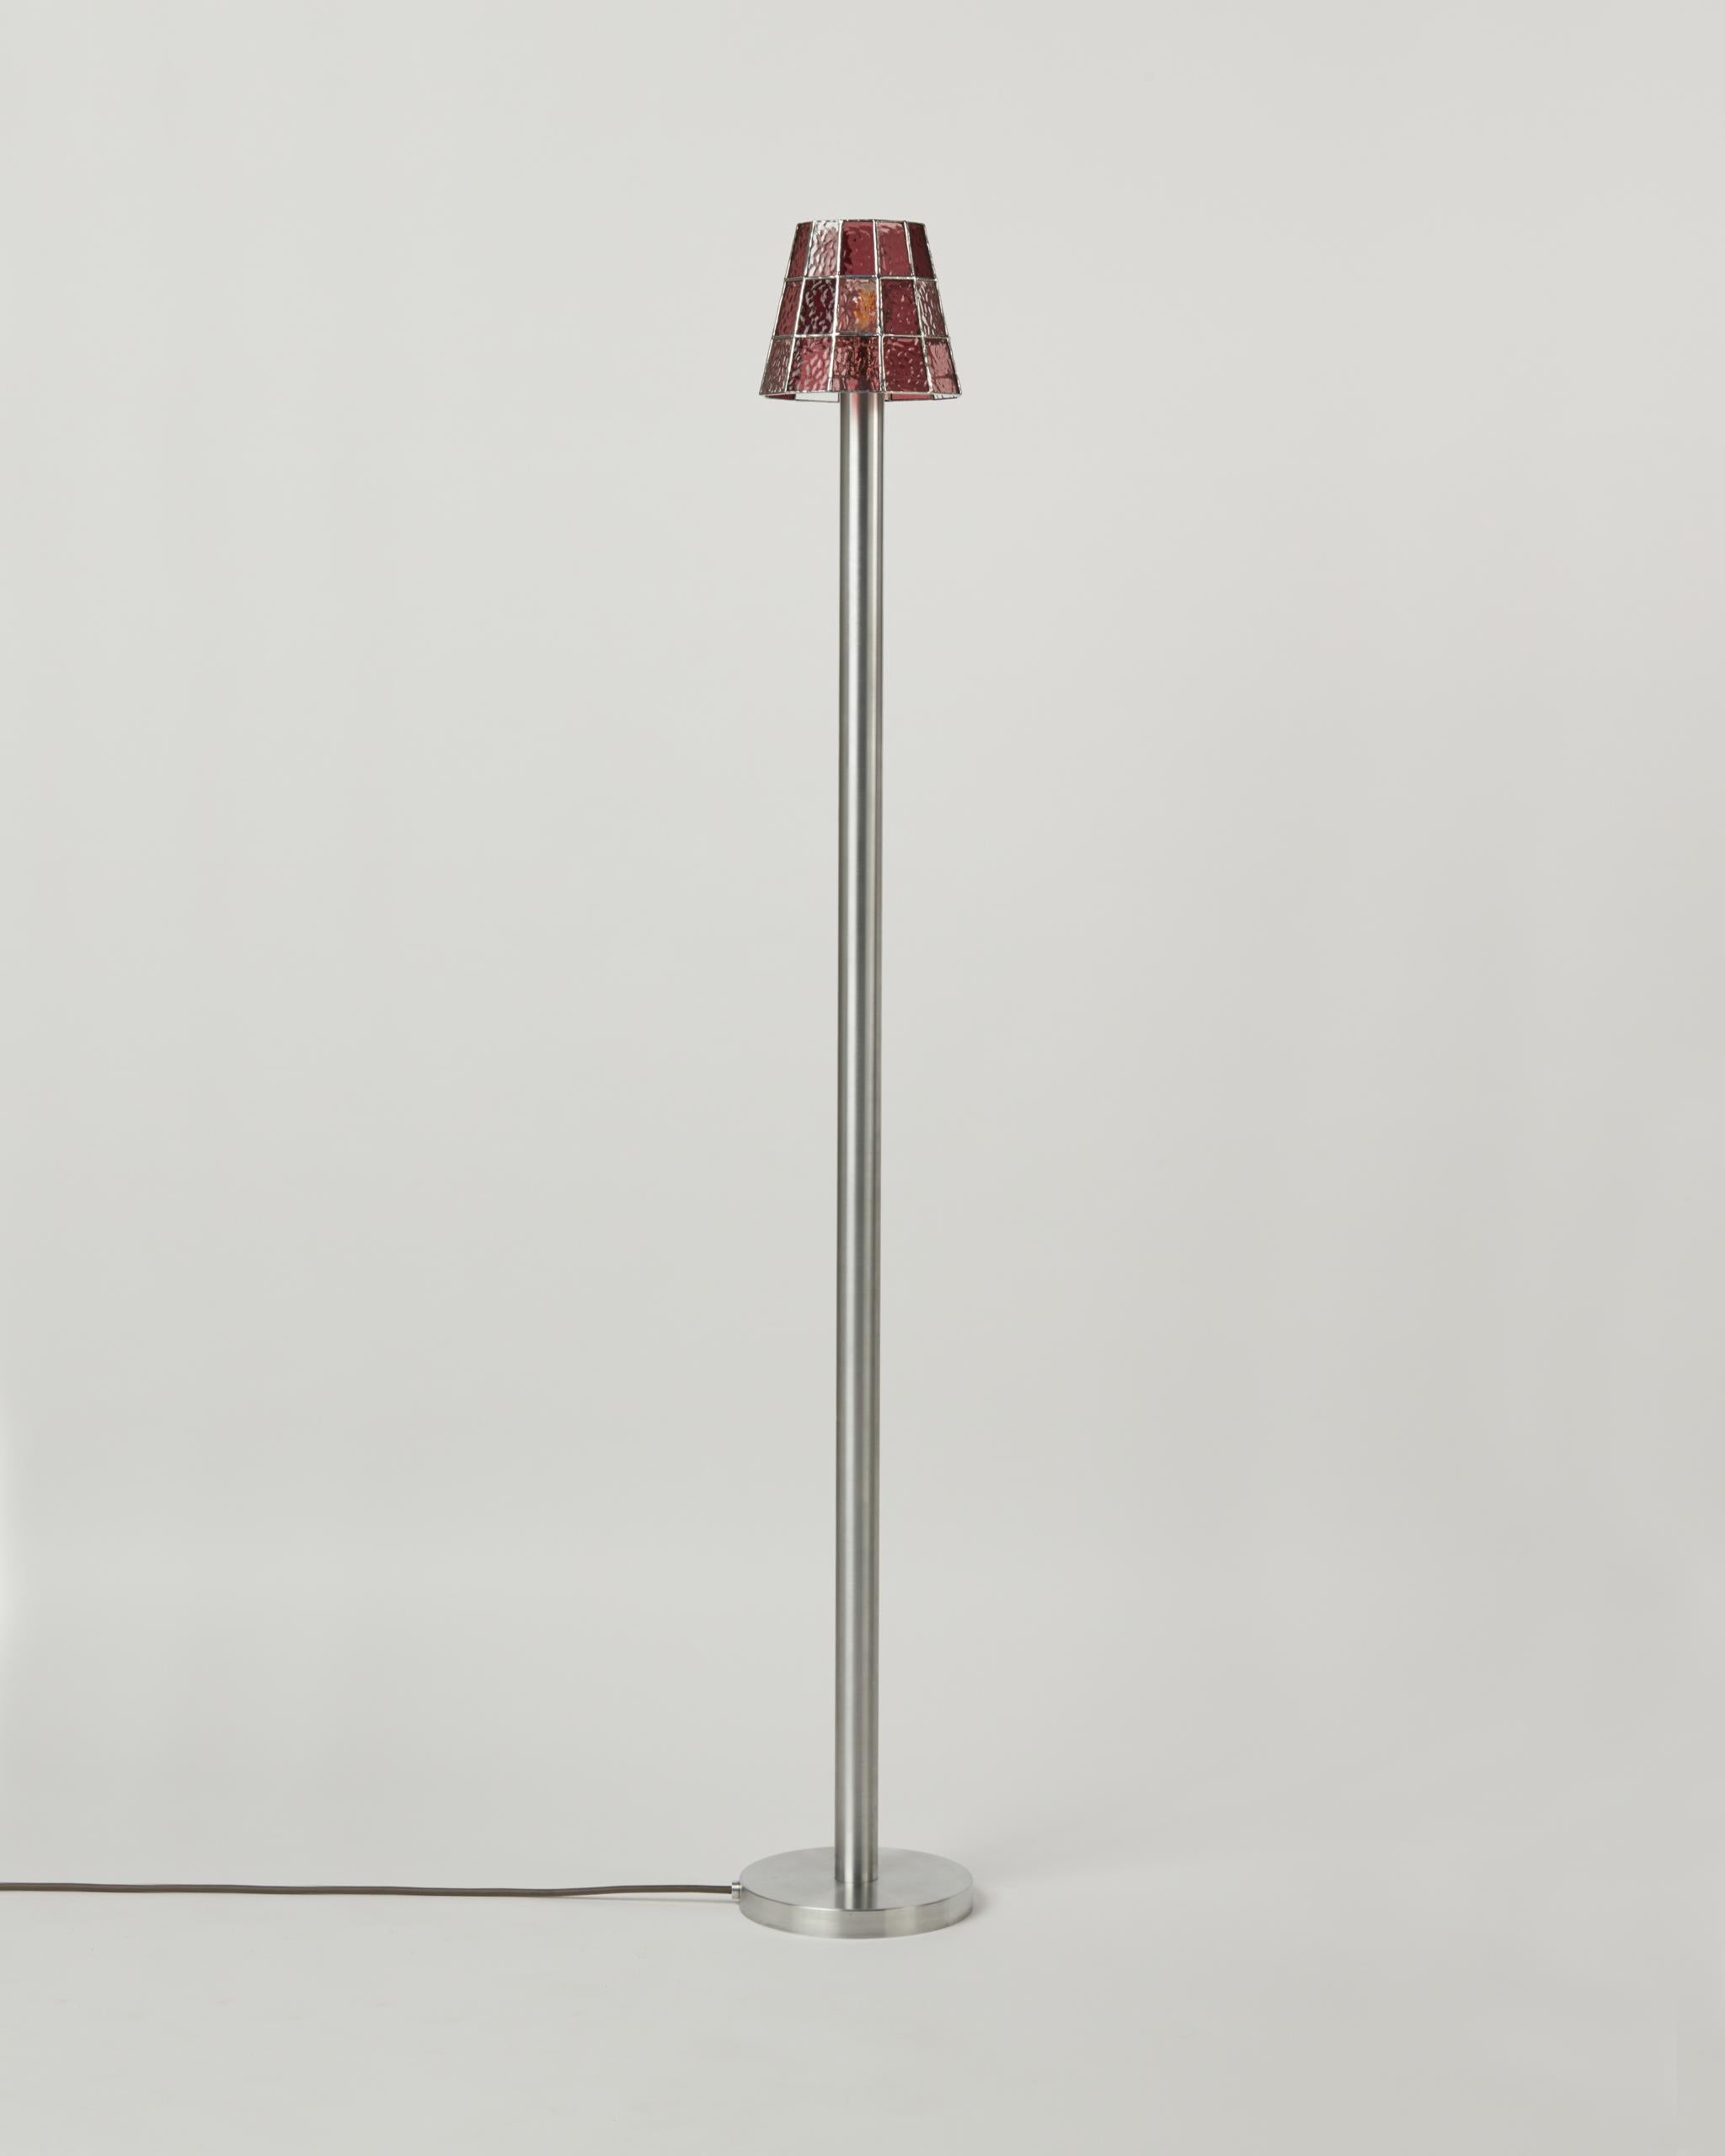 Fun Guy Stained Glass Floor Lamp by Frangere Studio In New Condition For Sale In Brooklyn, NY